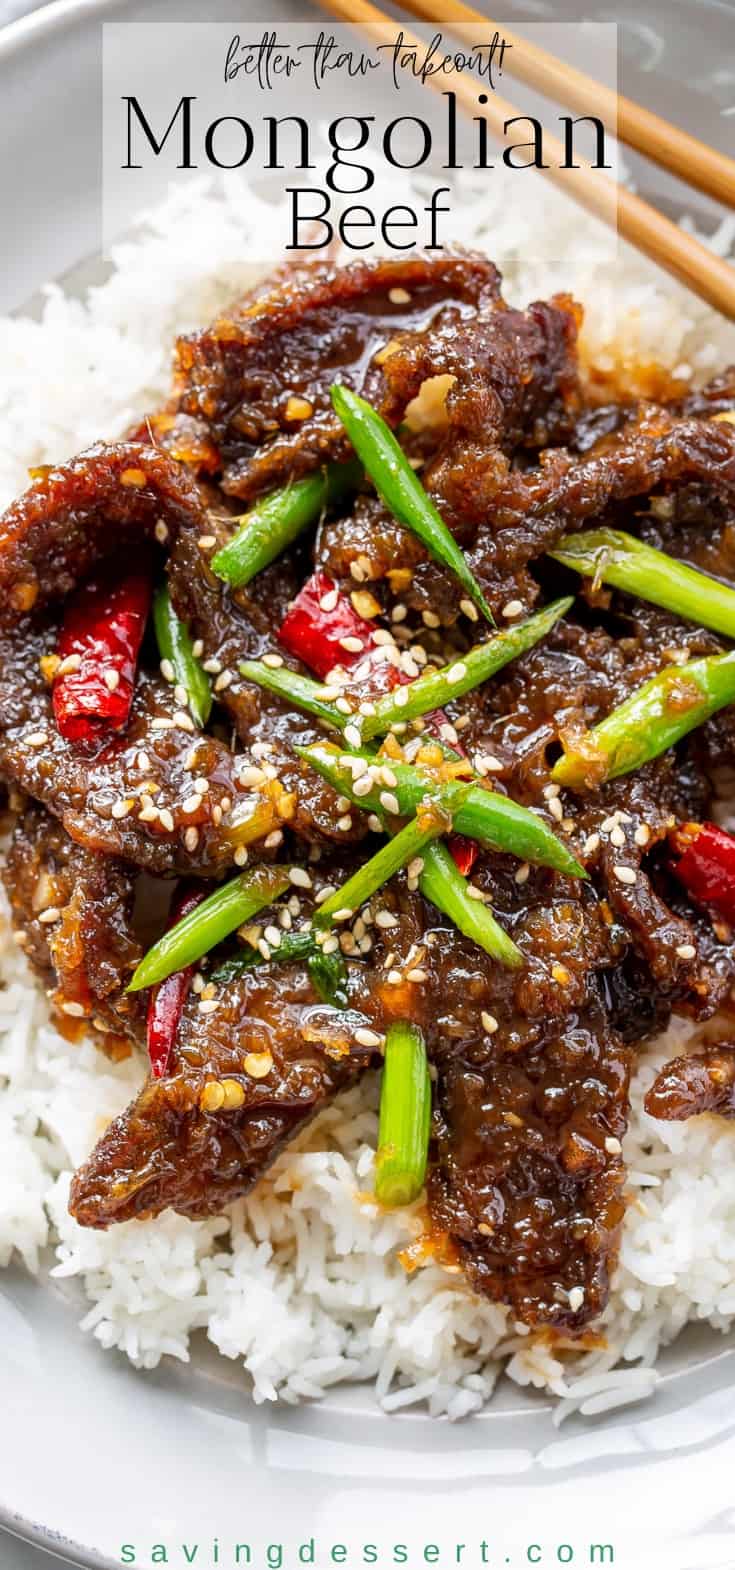 Sliced Mongolian Beef with onions and peppers served over rice